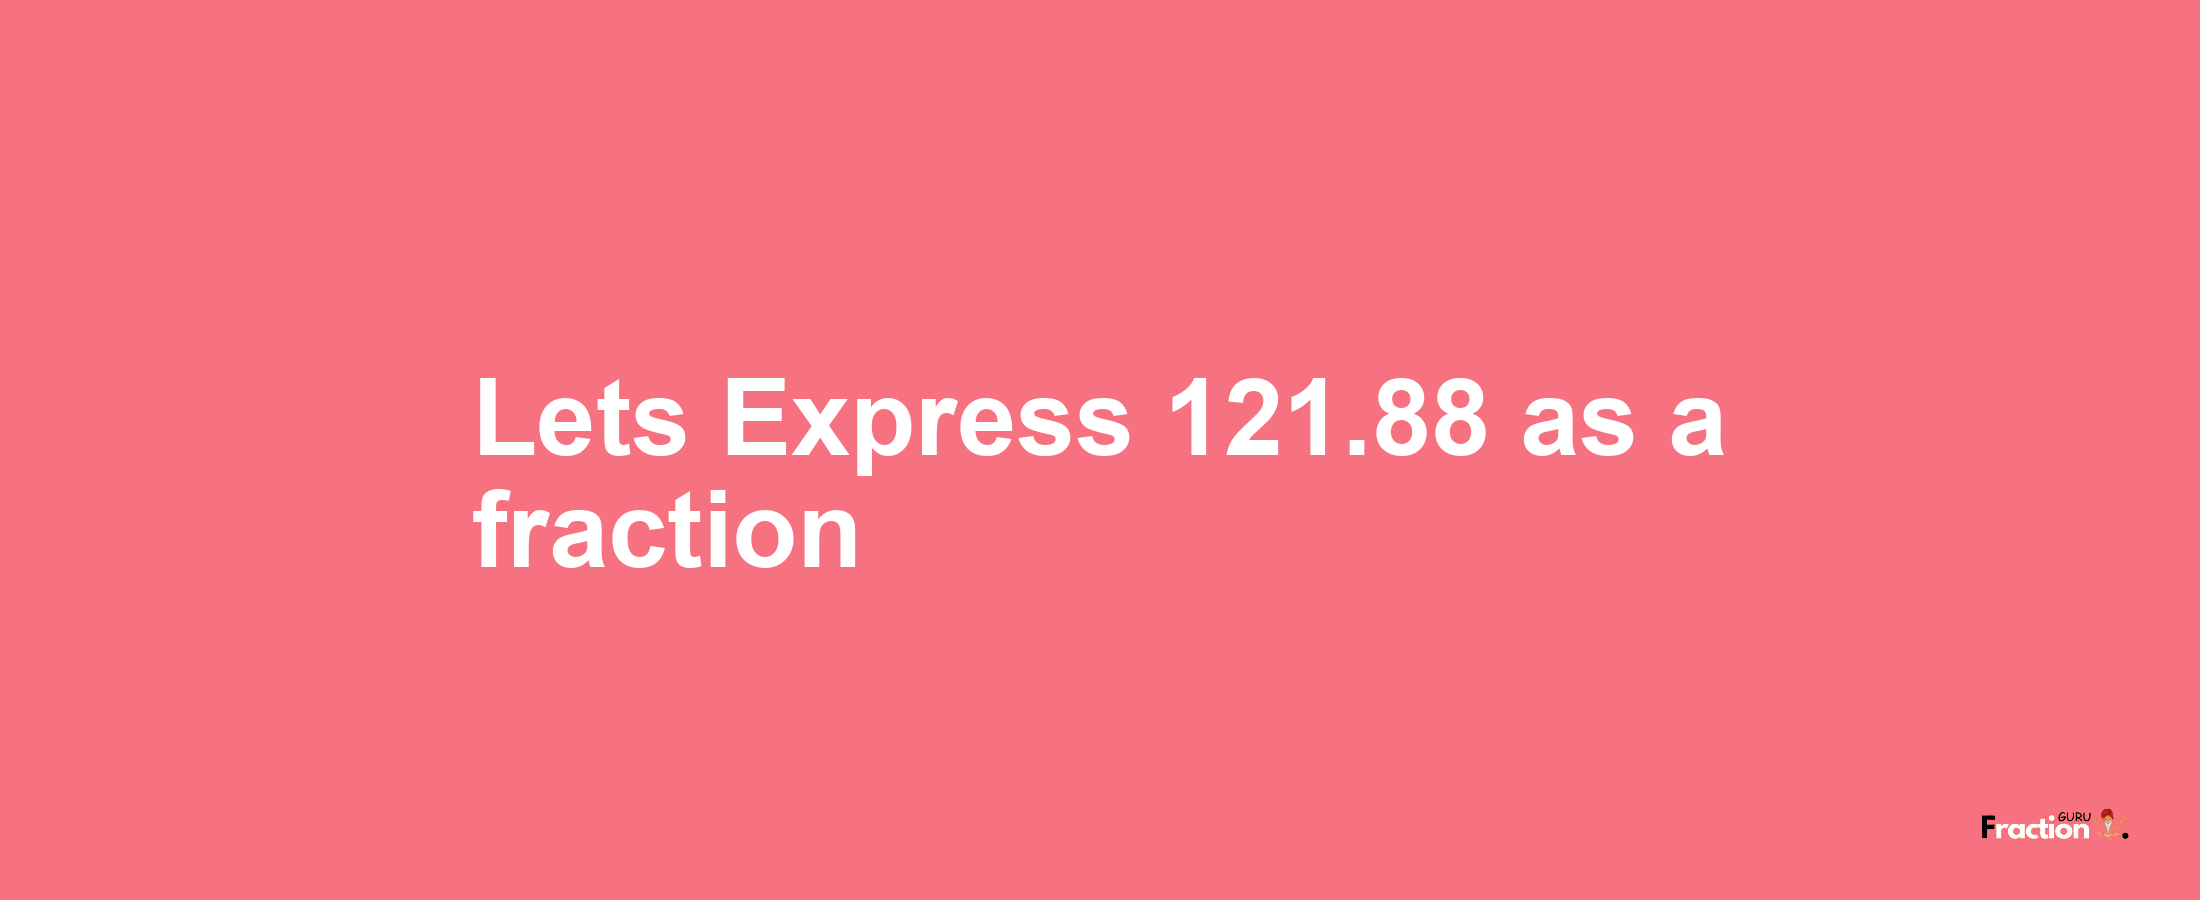 Lets Express 121.88 as afraction